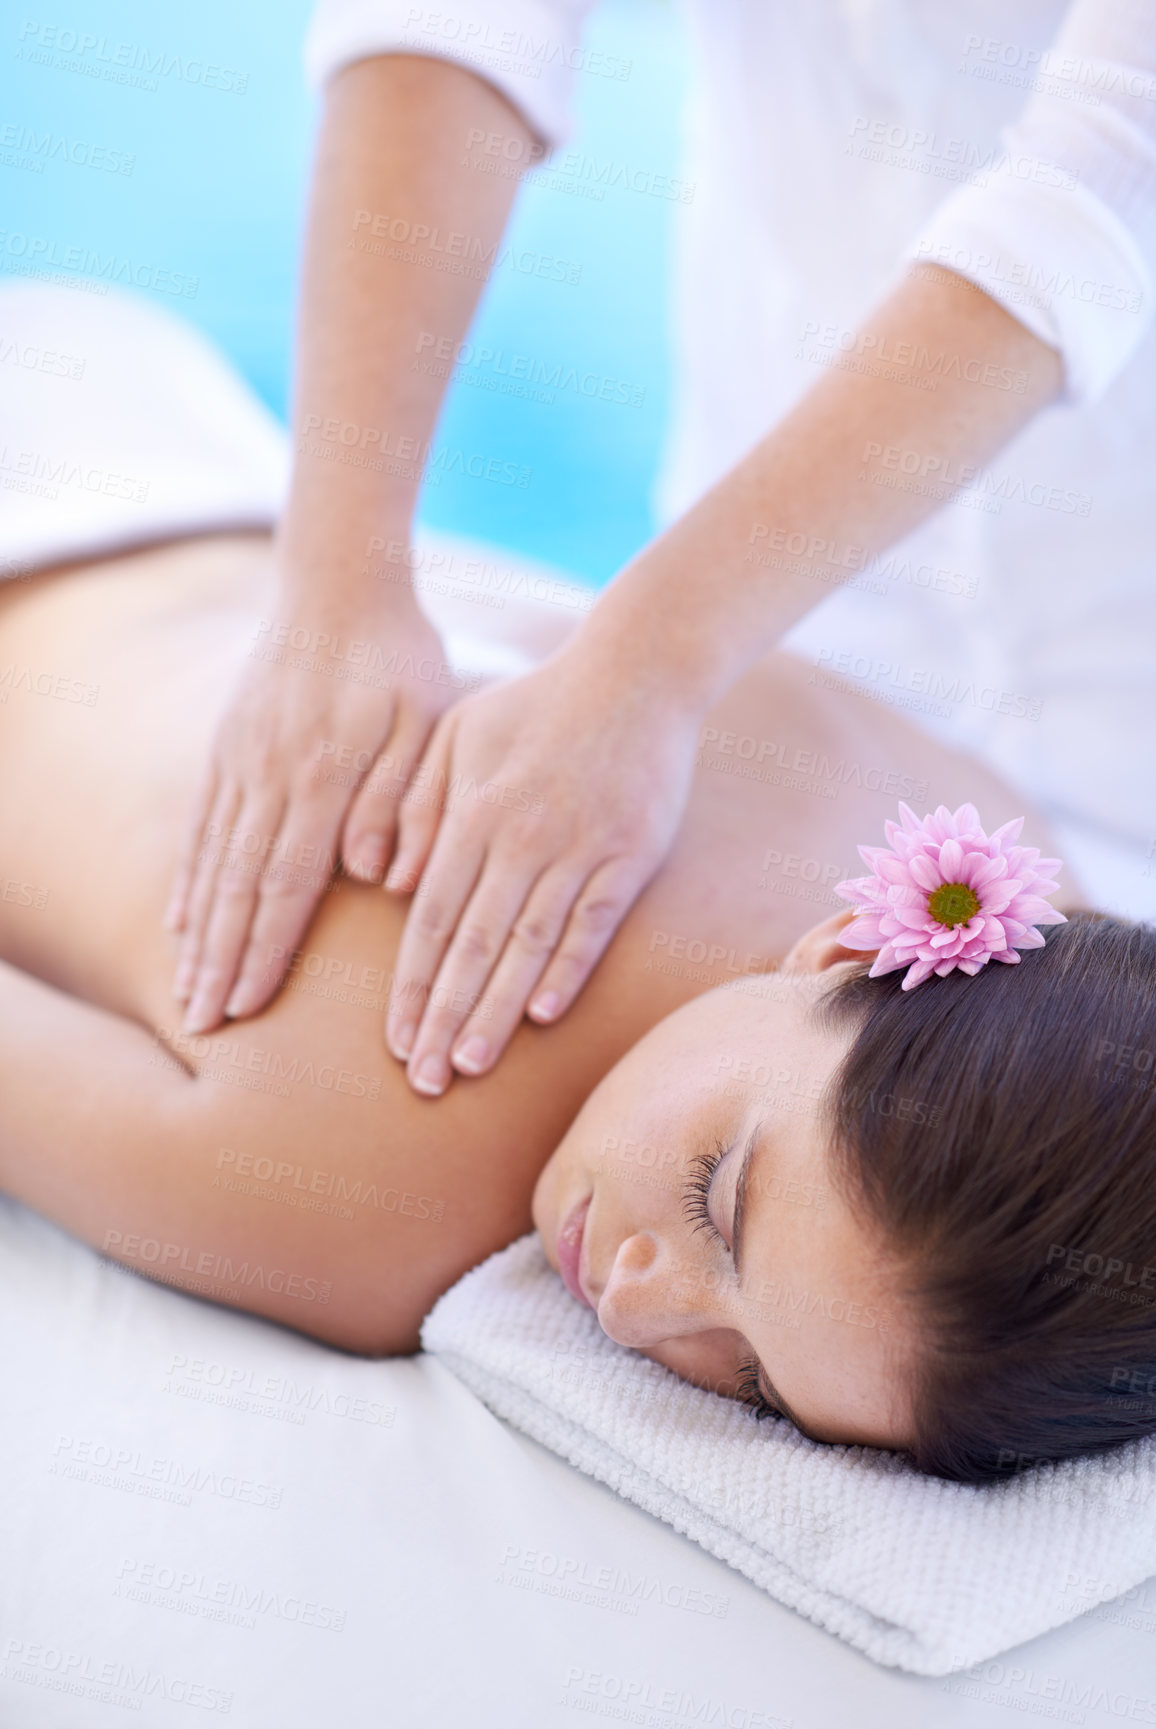 Buy stock photo Relax, massage and woman at hotel pool with flower for health, wellness and luxury holistic treatment. Self care, peace and girl on table with masseuse for body therapy, sleep and calm spa service